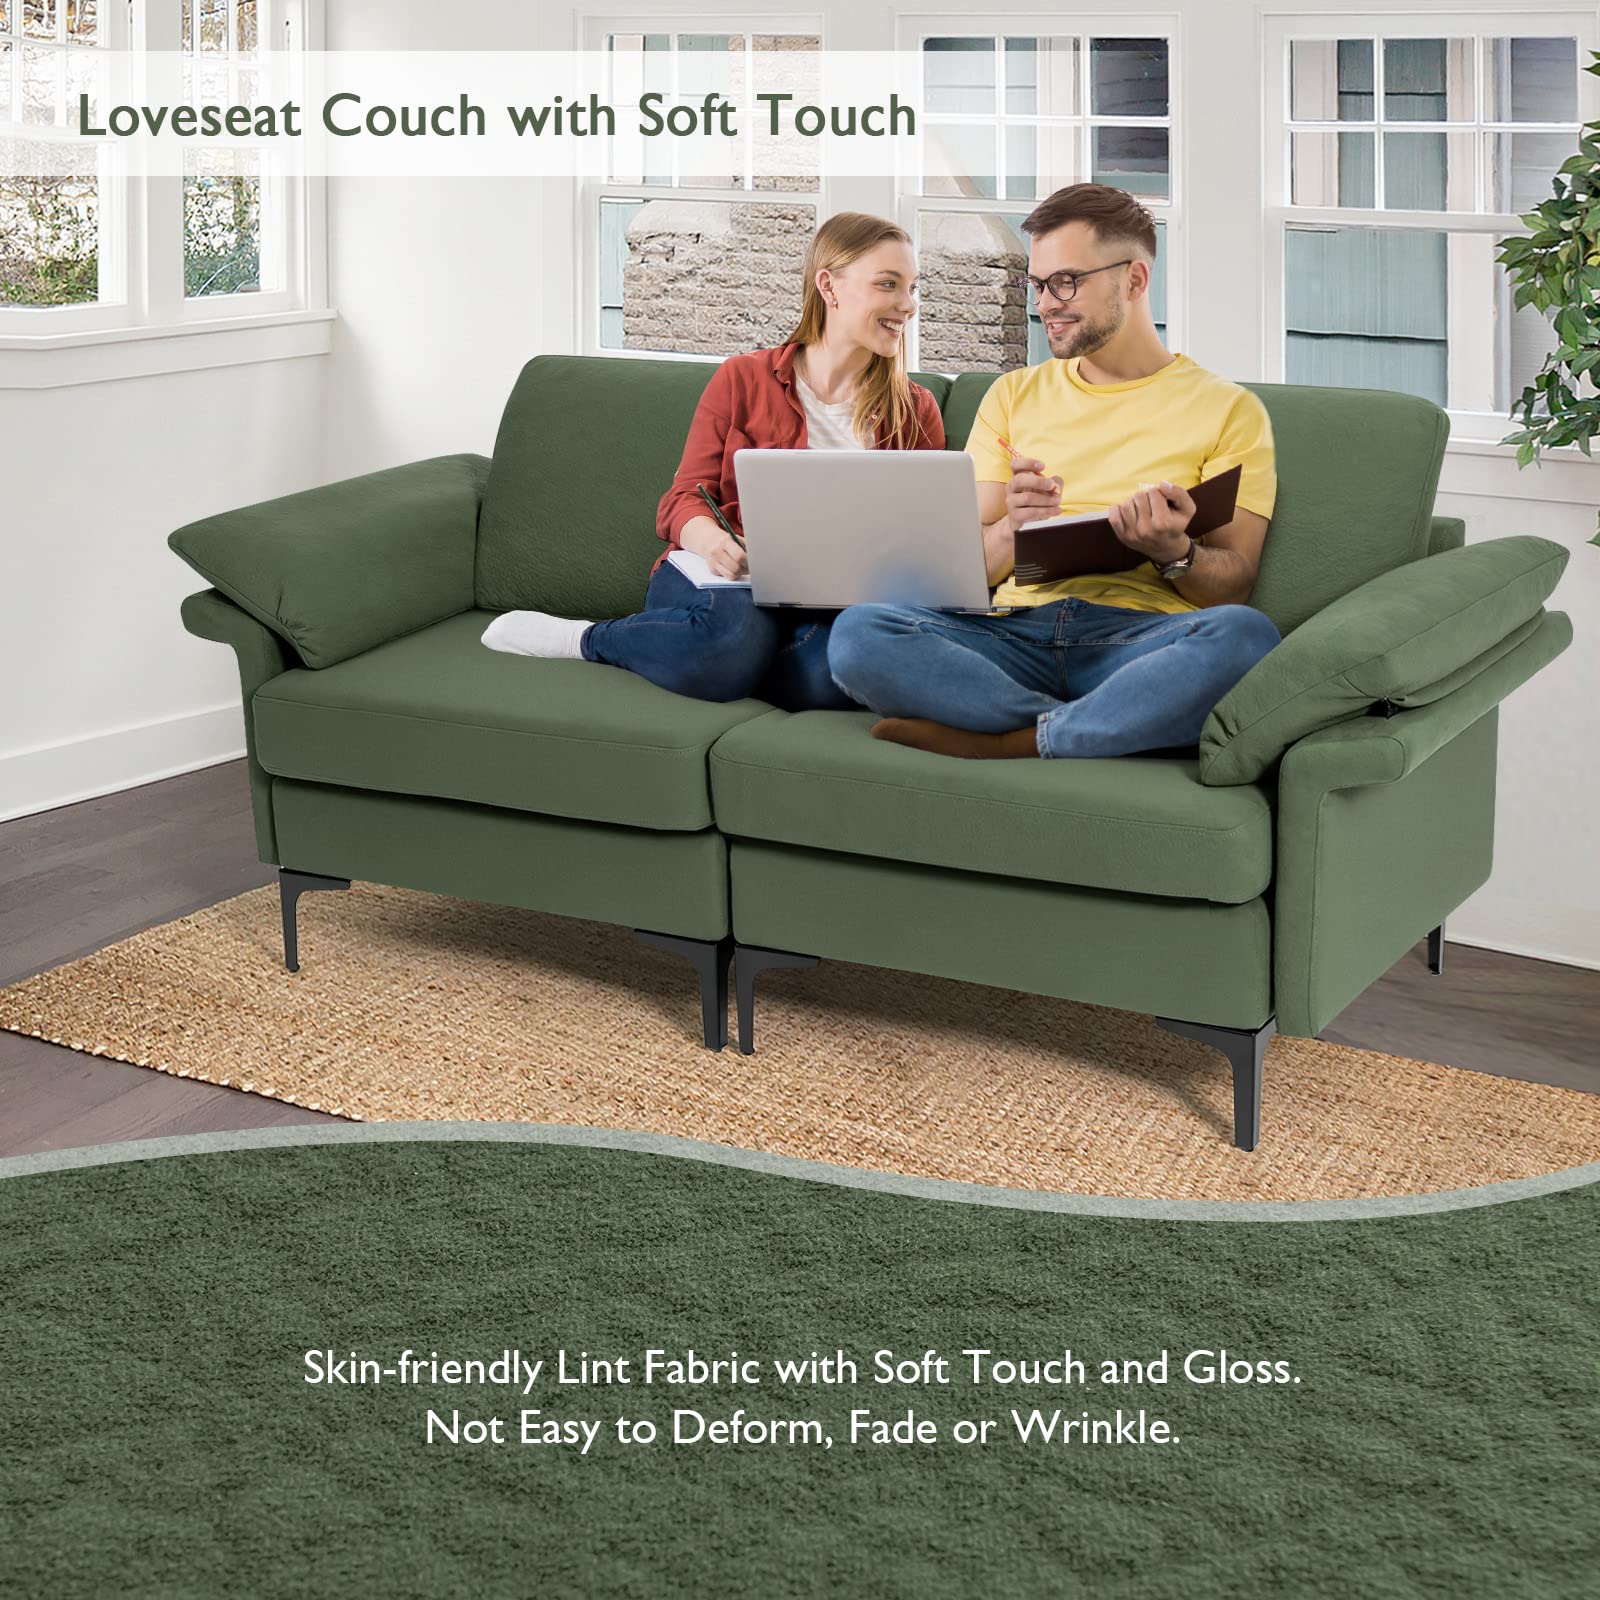 Giantex 72.5" L Loveseat, 2-Seat Sofa Couch with Removable Armrest Pillows